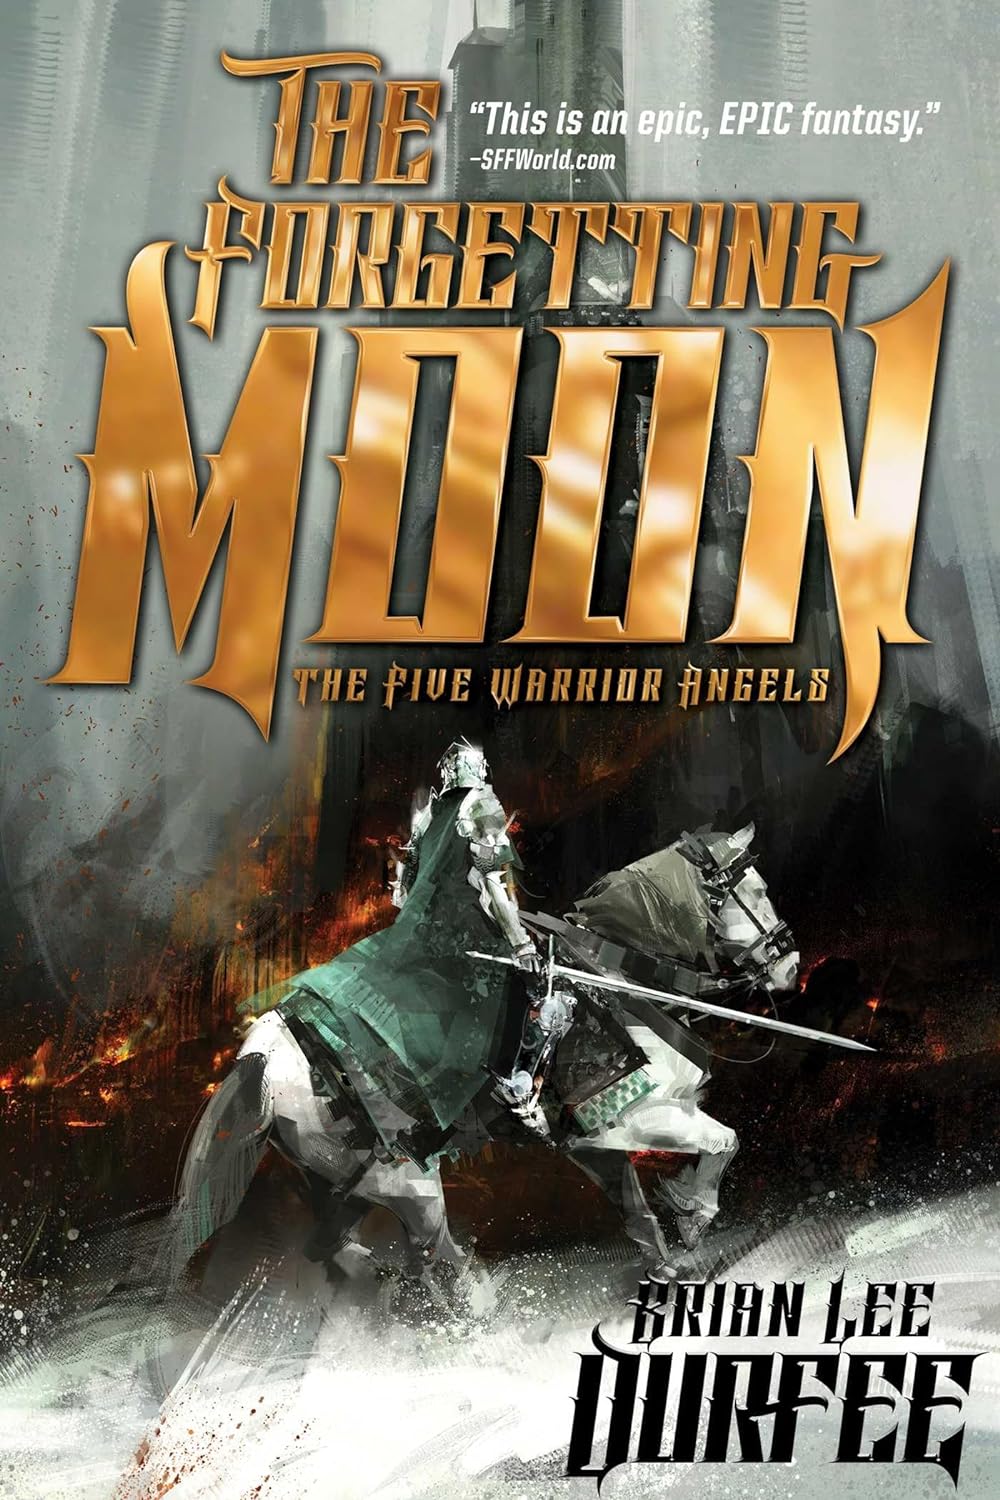 The Forgetting Moon (The Five Warrior Angels Series), by Brian Lee Durfee